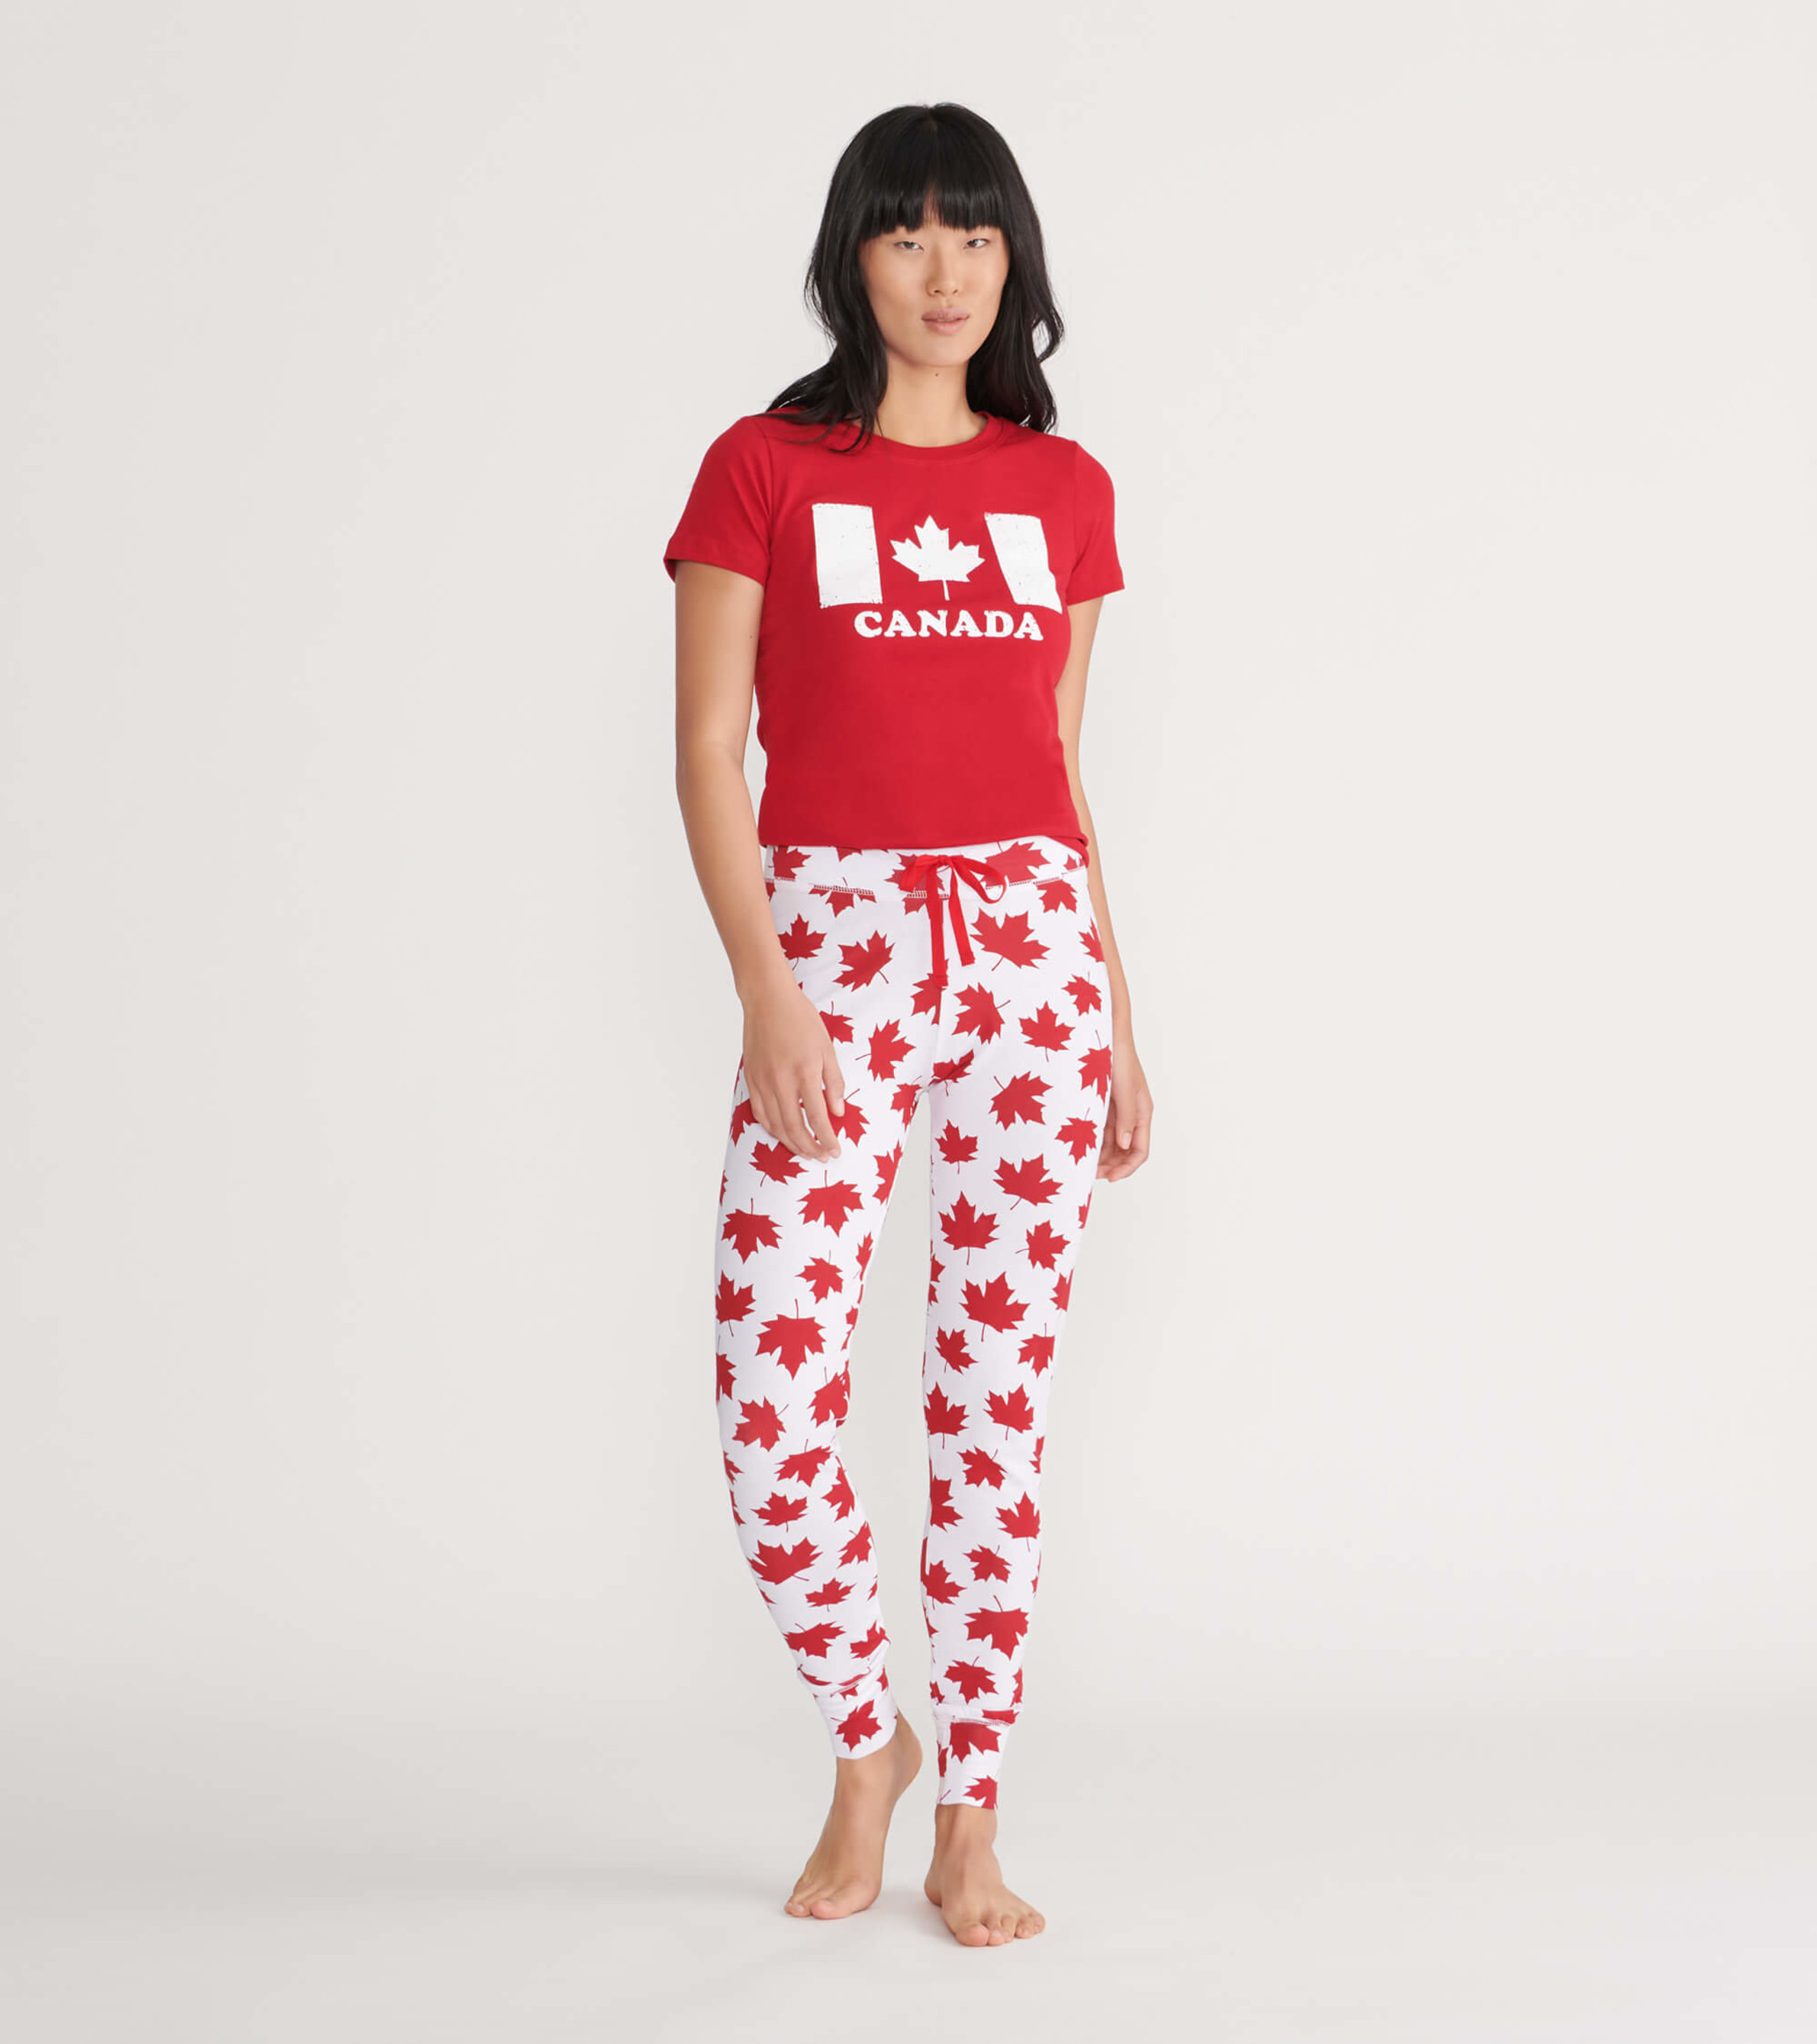 Made in Canada Women's Tee and Leggings Pajama Separates - Little